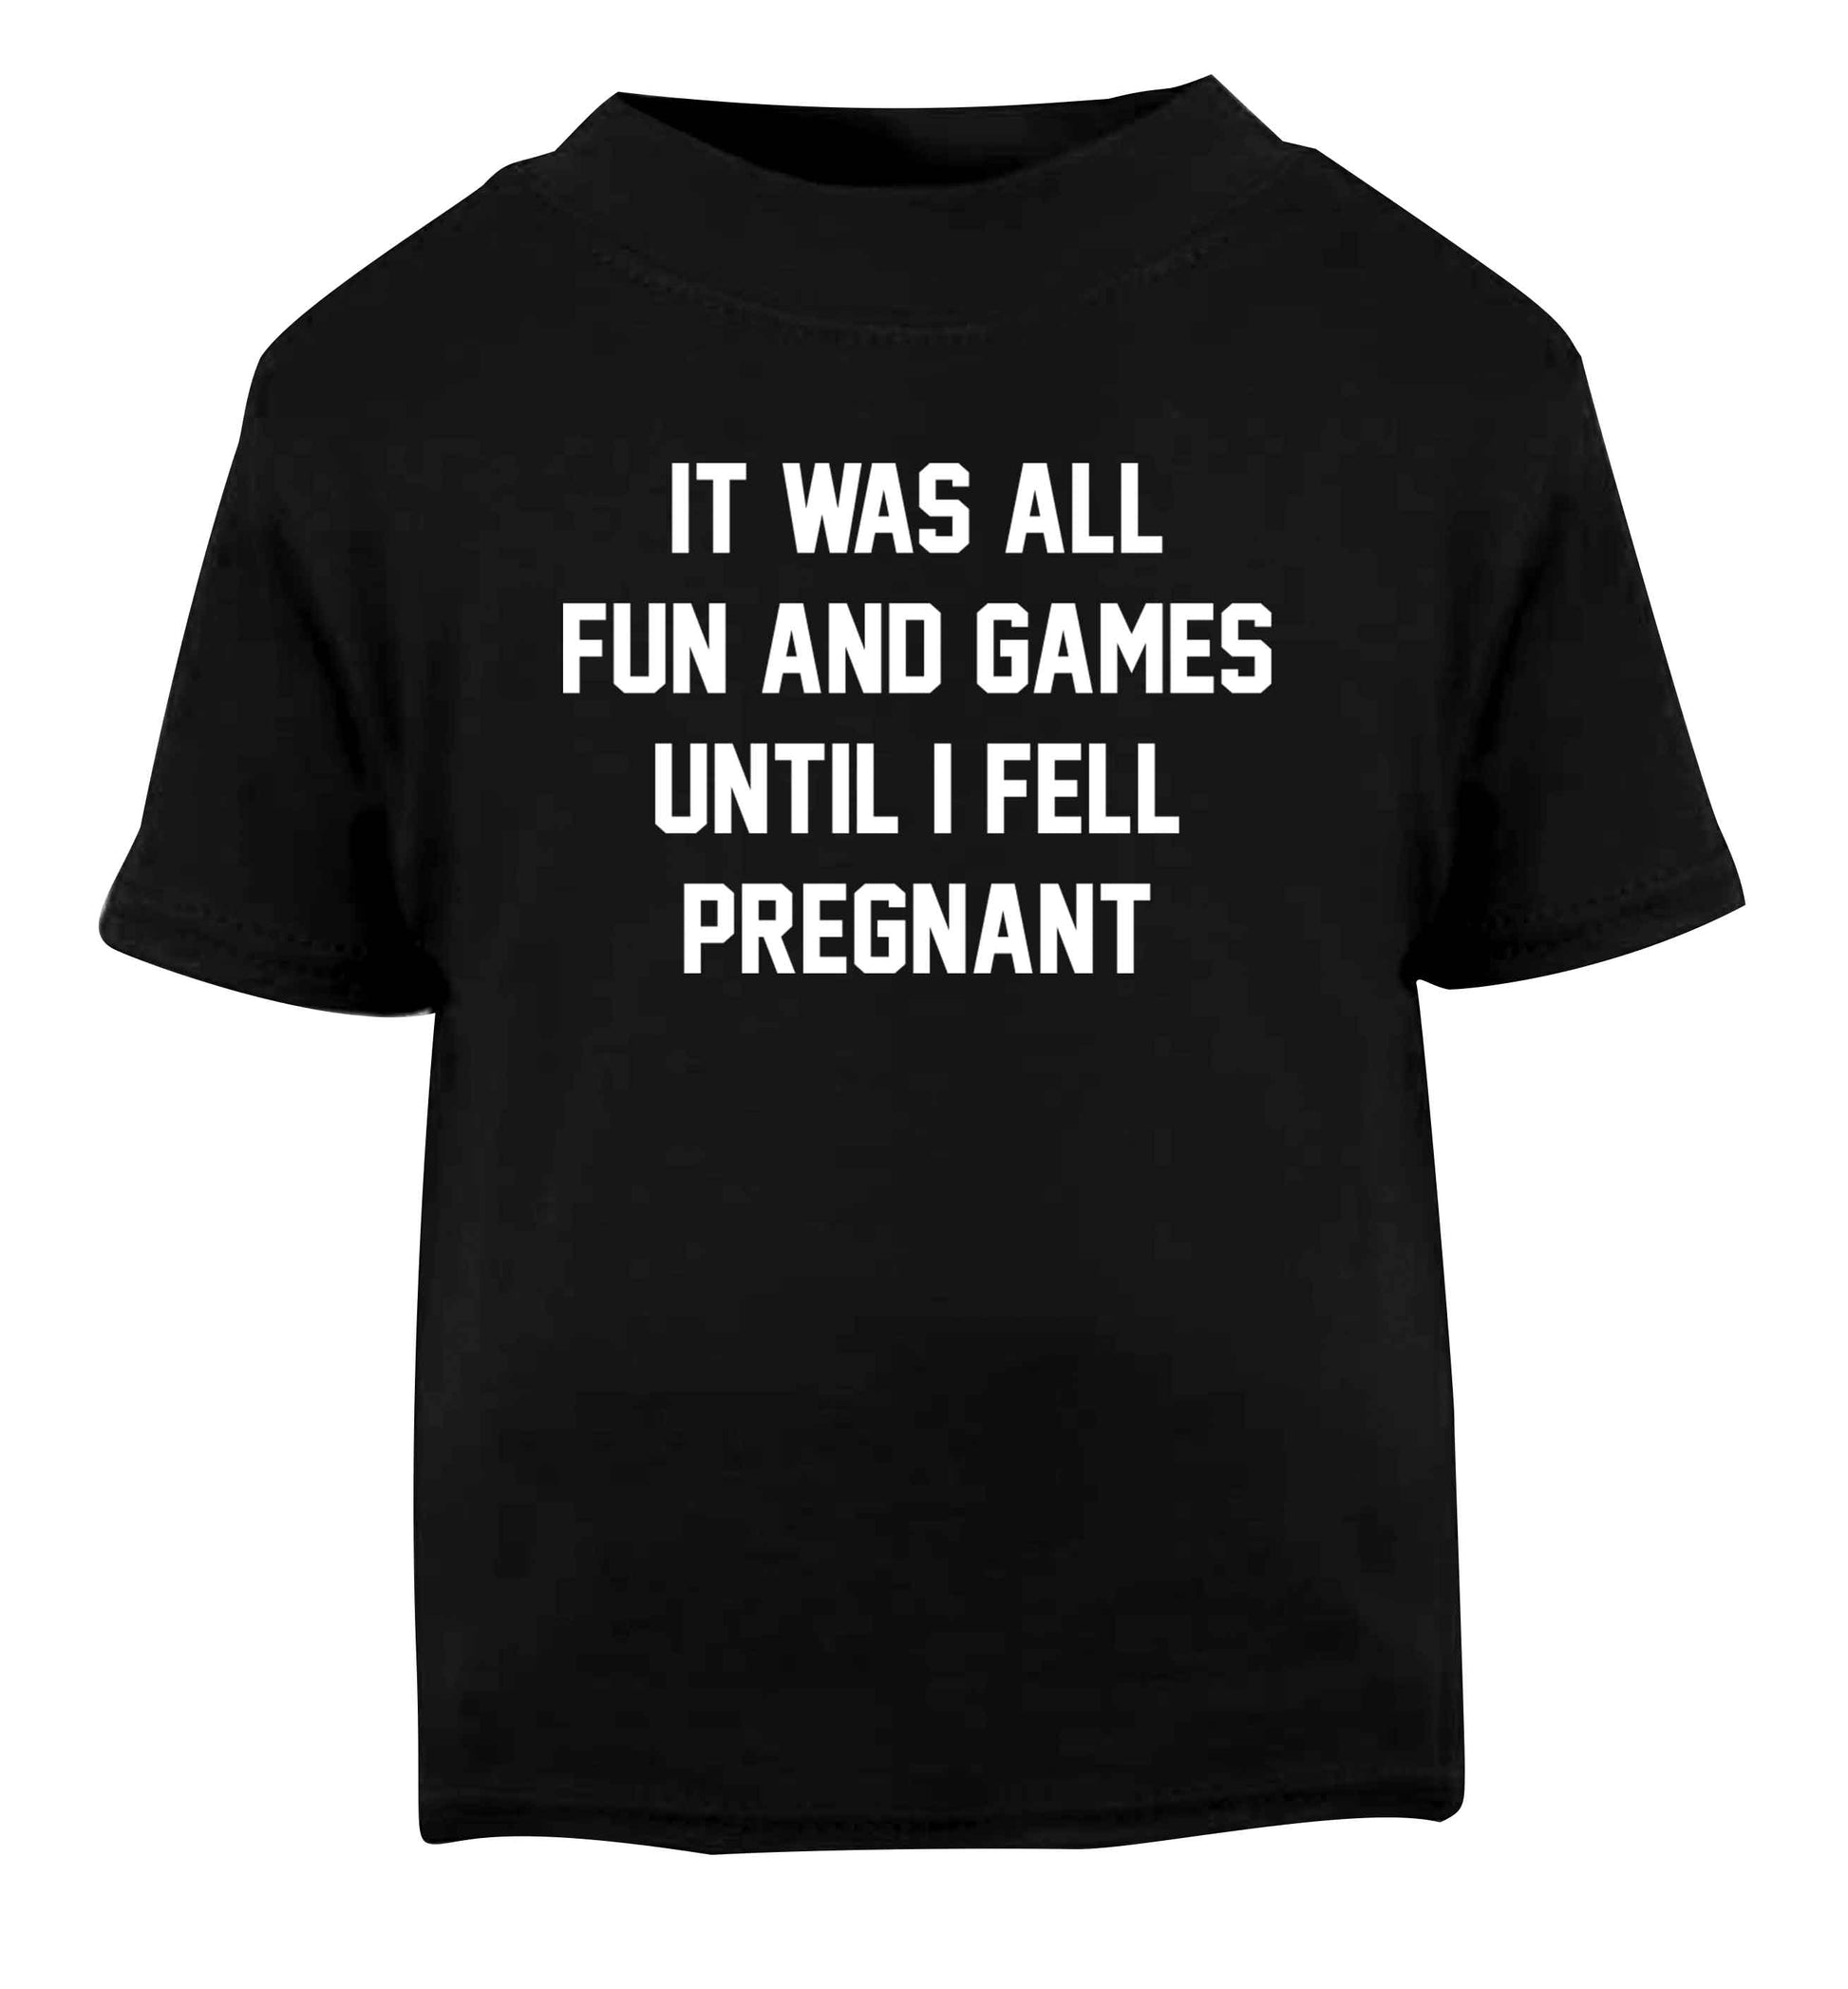 It was all fun and games until I fell pregnant kicks Black Baby Toddler Tshirt 2 years